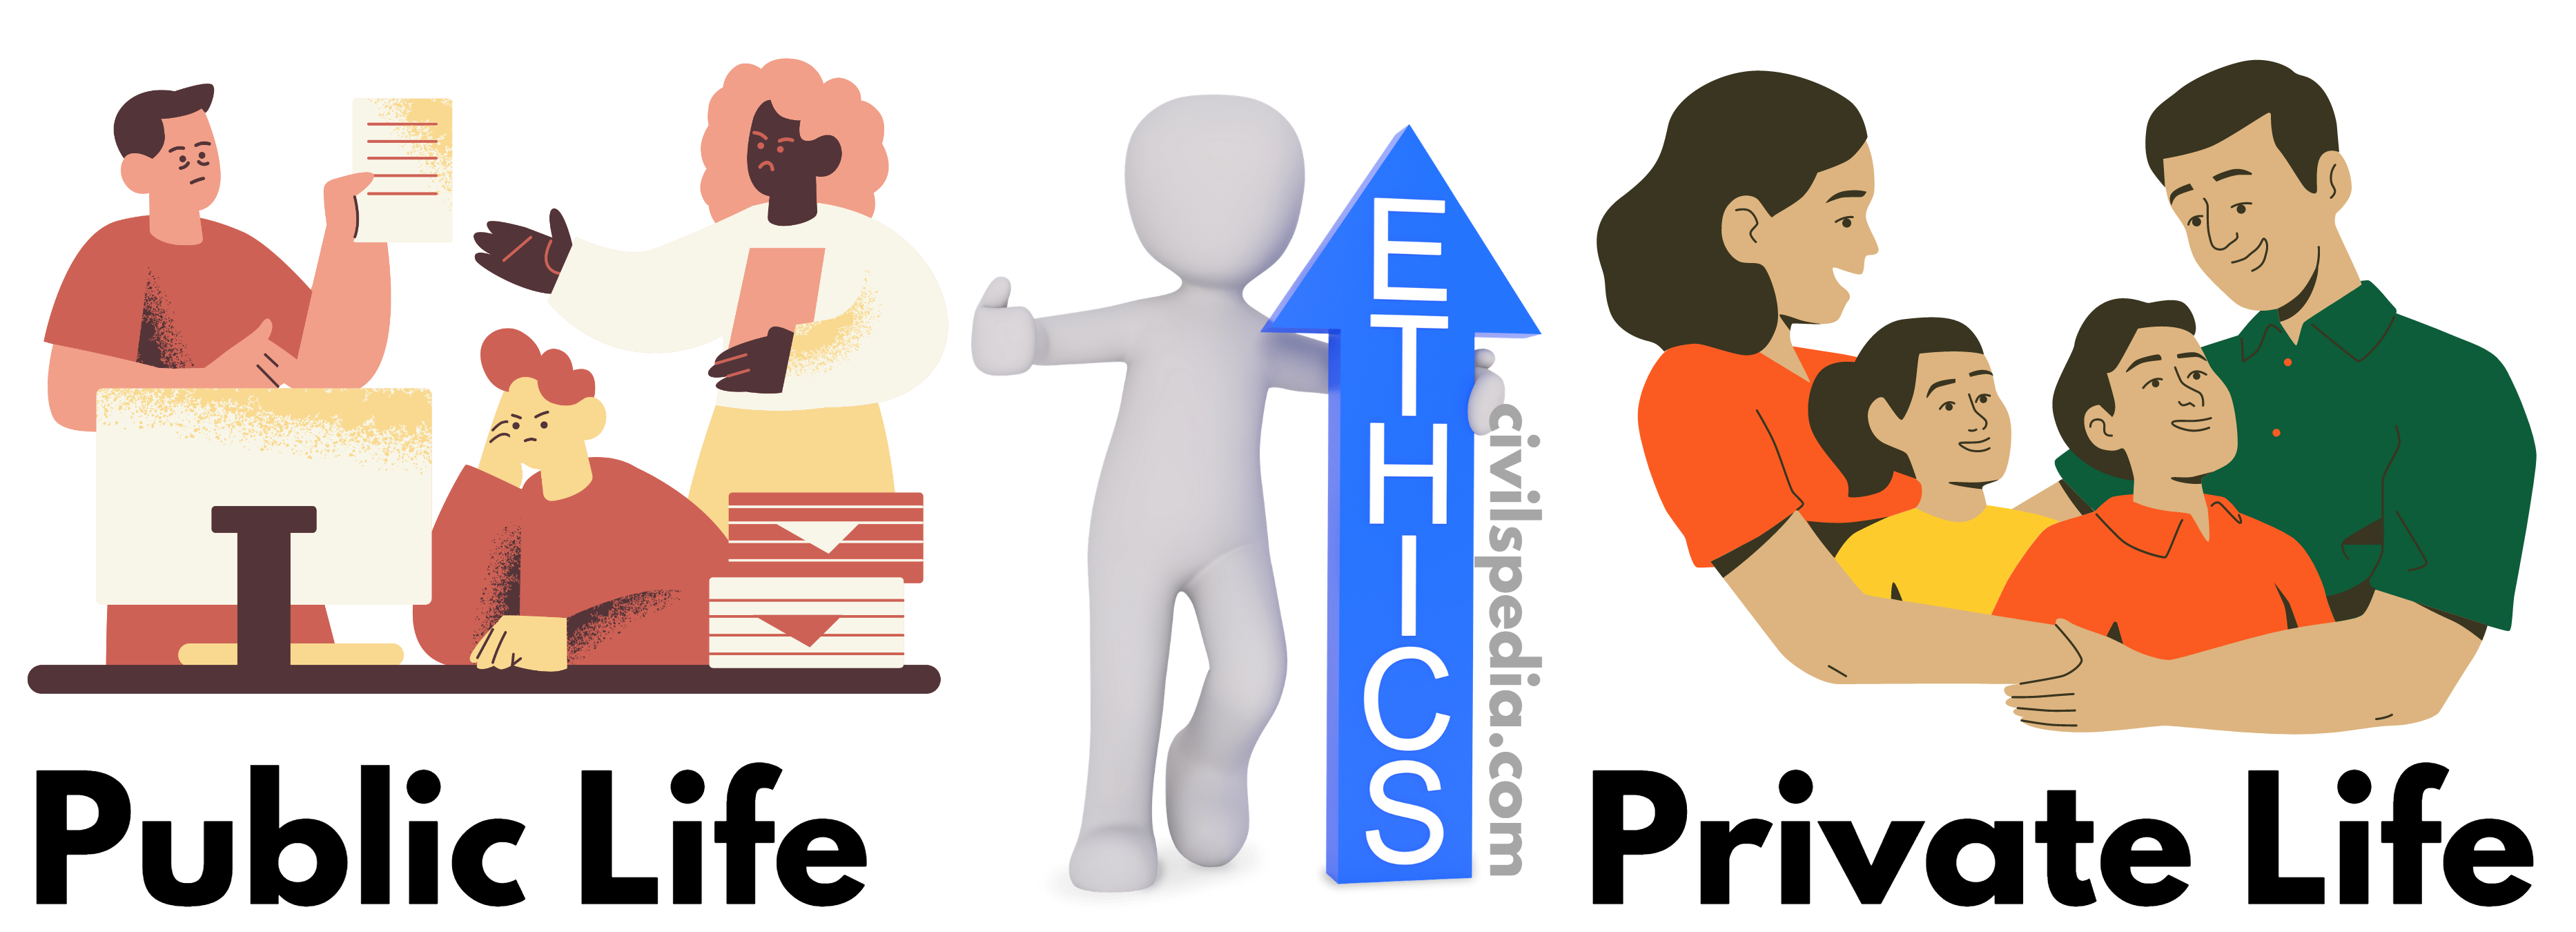 Ethics in Private and Public Relationships